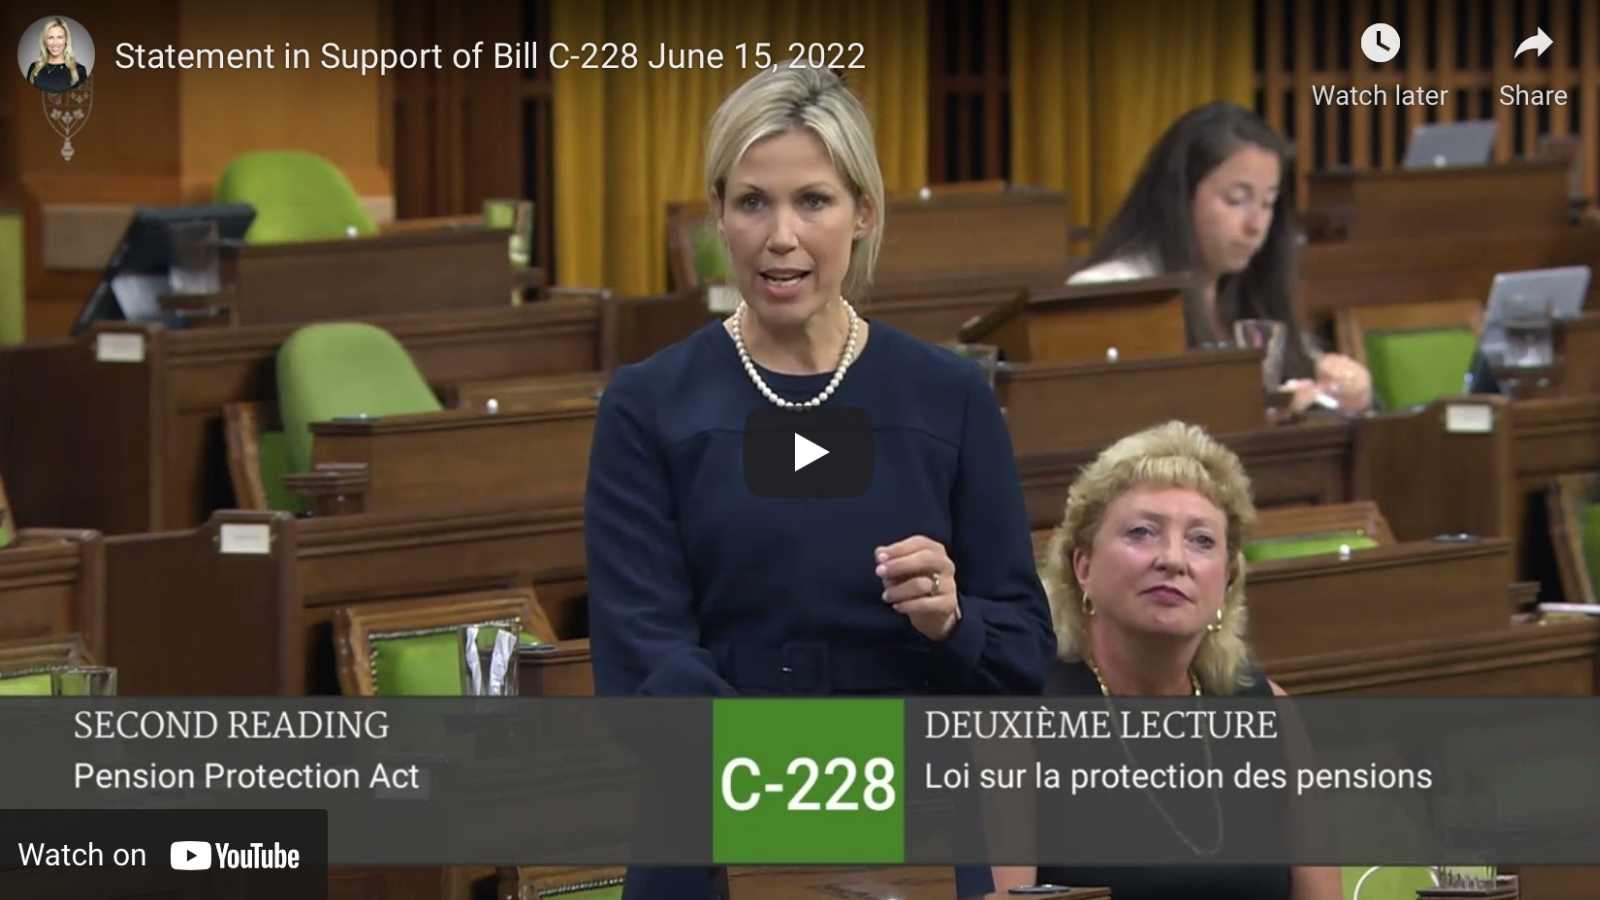 Shelby Kramp-Neuman MP speaks in the House of Commons to support Bill C-228